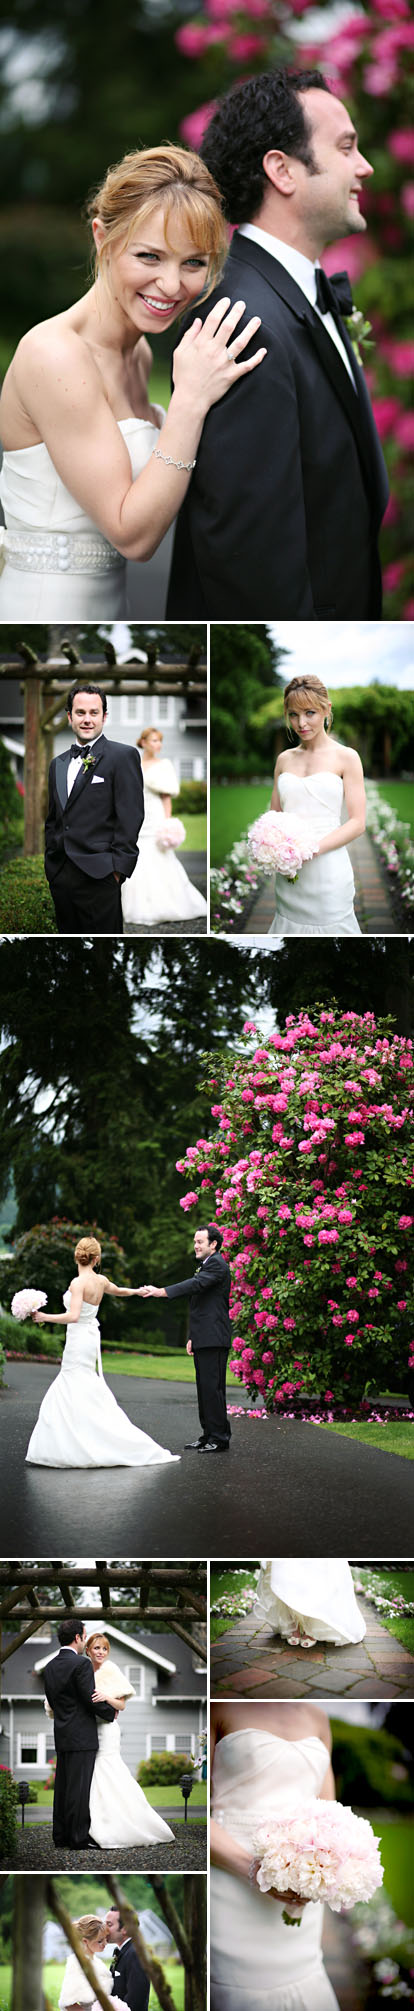 real wedding at carnation farms, wedding dress by monique lhuillier, photo by jasmine star photography